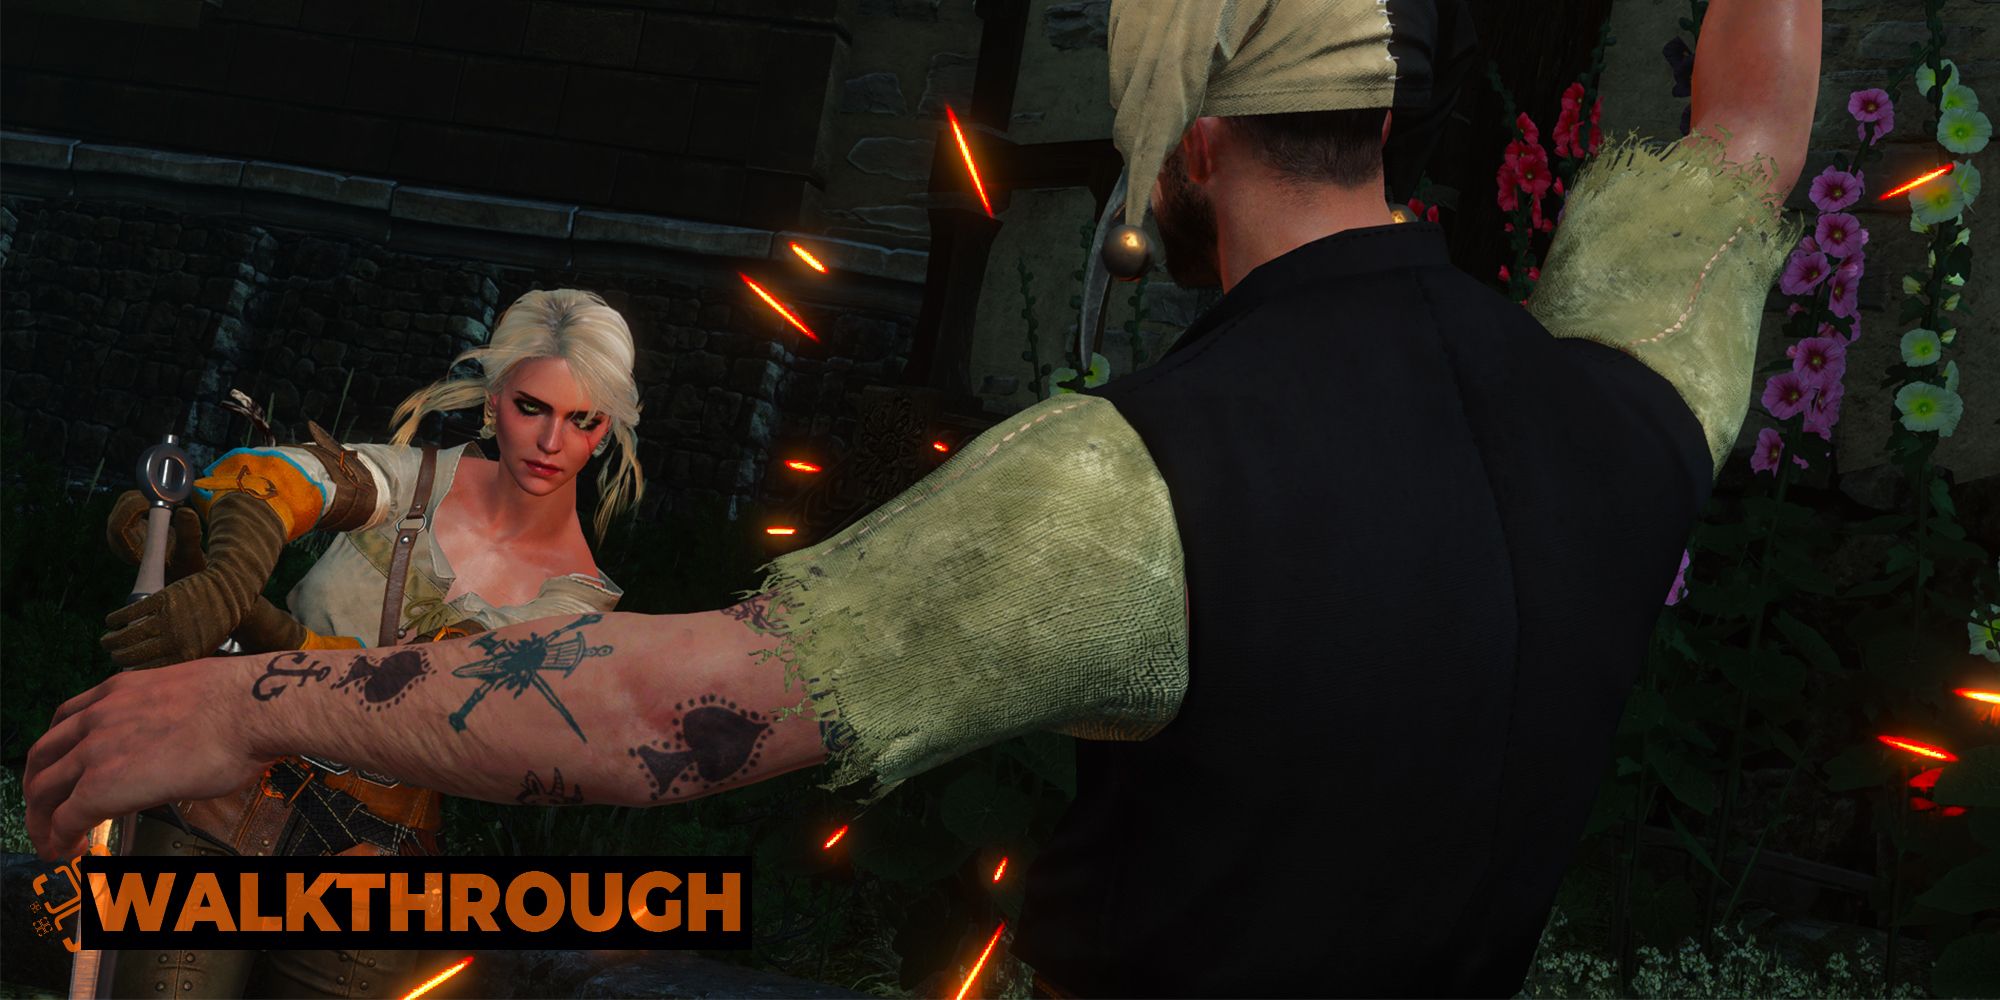 Ciri expertly parries a sword strike from a thug, sending sparks flying.